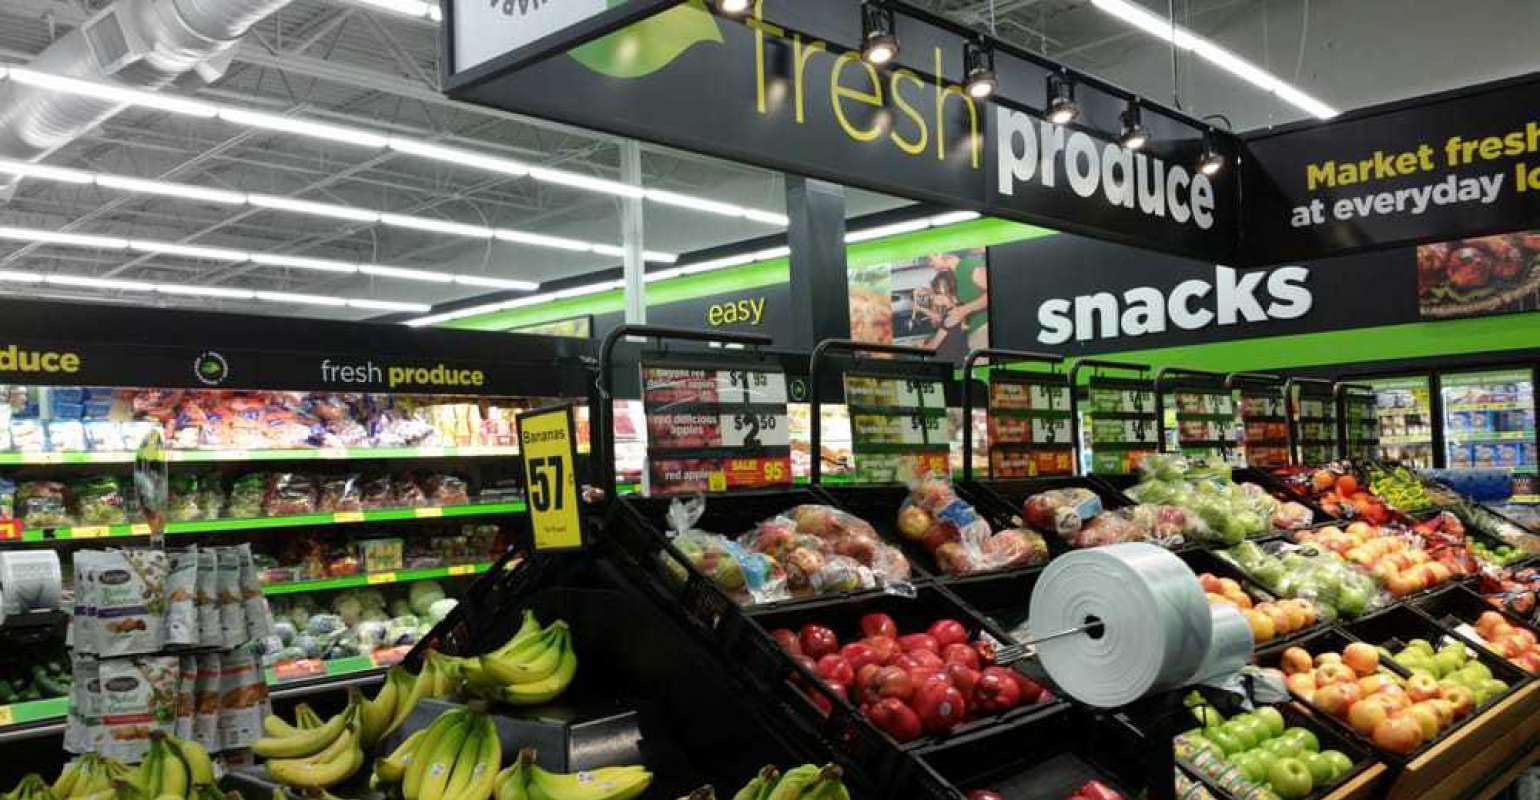 Study: Produce quality same at dollar and grocery stores | Supermarket News